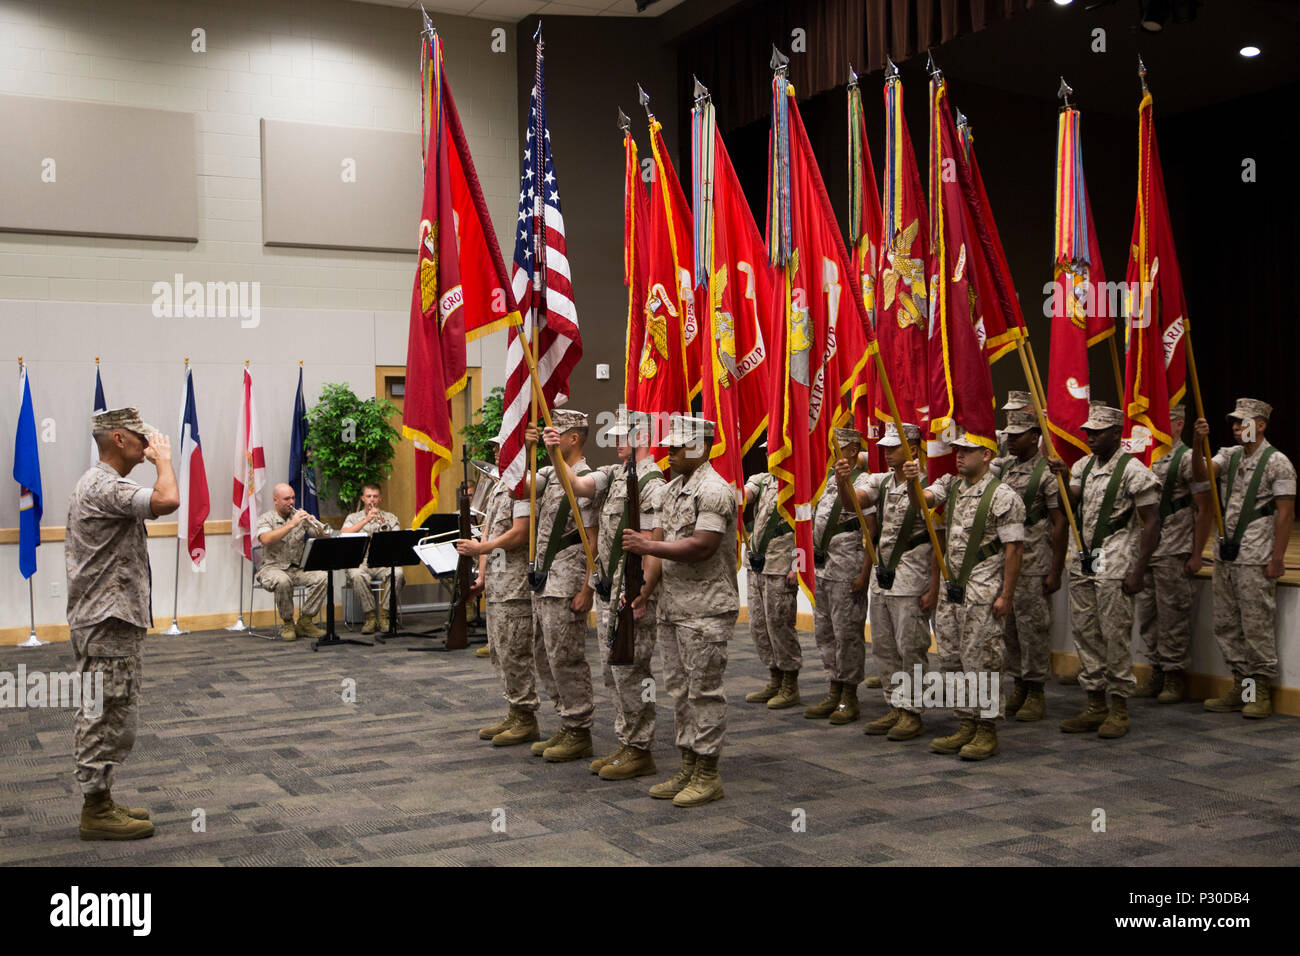 The Force Headquarters Group color guard presents the colors to Lt. Gen. Rex C. McMillian, commander of Marine Forces Reserve and Marine Forces North, during the FHG change of command ceremony at the Federal City Auditorium, New Orleans, Aug. 13, 2016. Each one of the flags represented one of the 12 commands of FHG in honor of the incoming commander Brig. Gen. Michael F. Fahey and outgoing commander Brig. Gen. Helen G. Pratt. (U.S. Marine Corps photo by Lance Cpl. Melissa Martens/ Released) Stock Photo